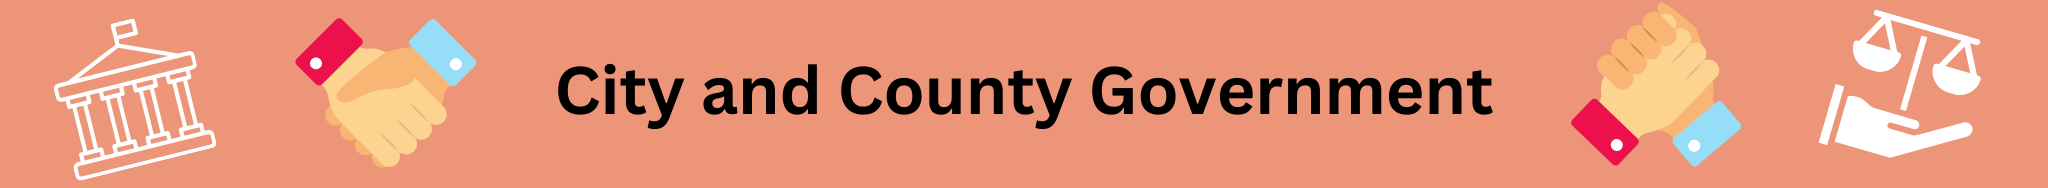 City and County Government